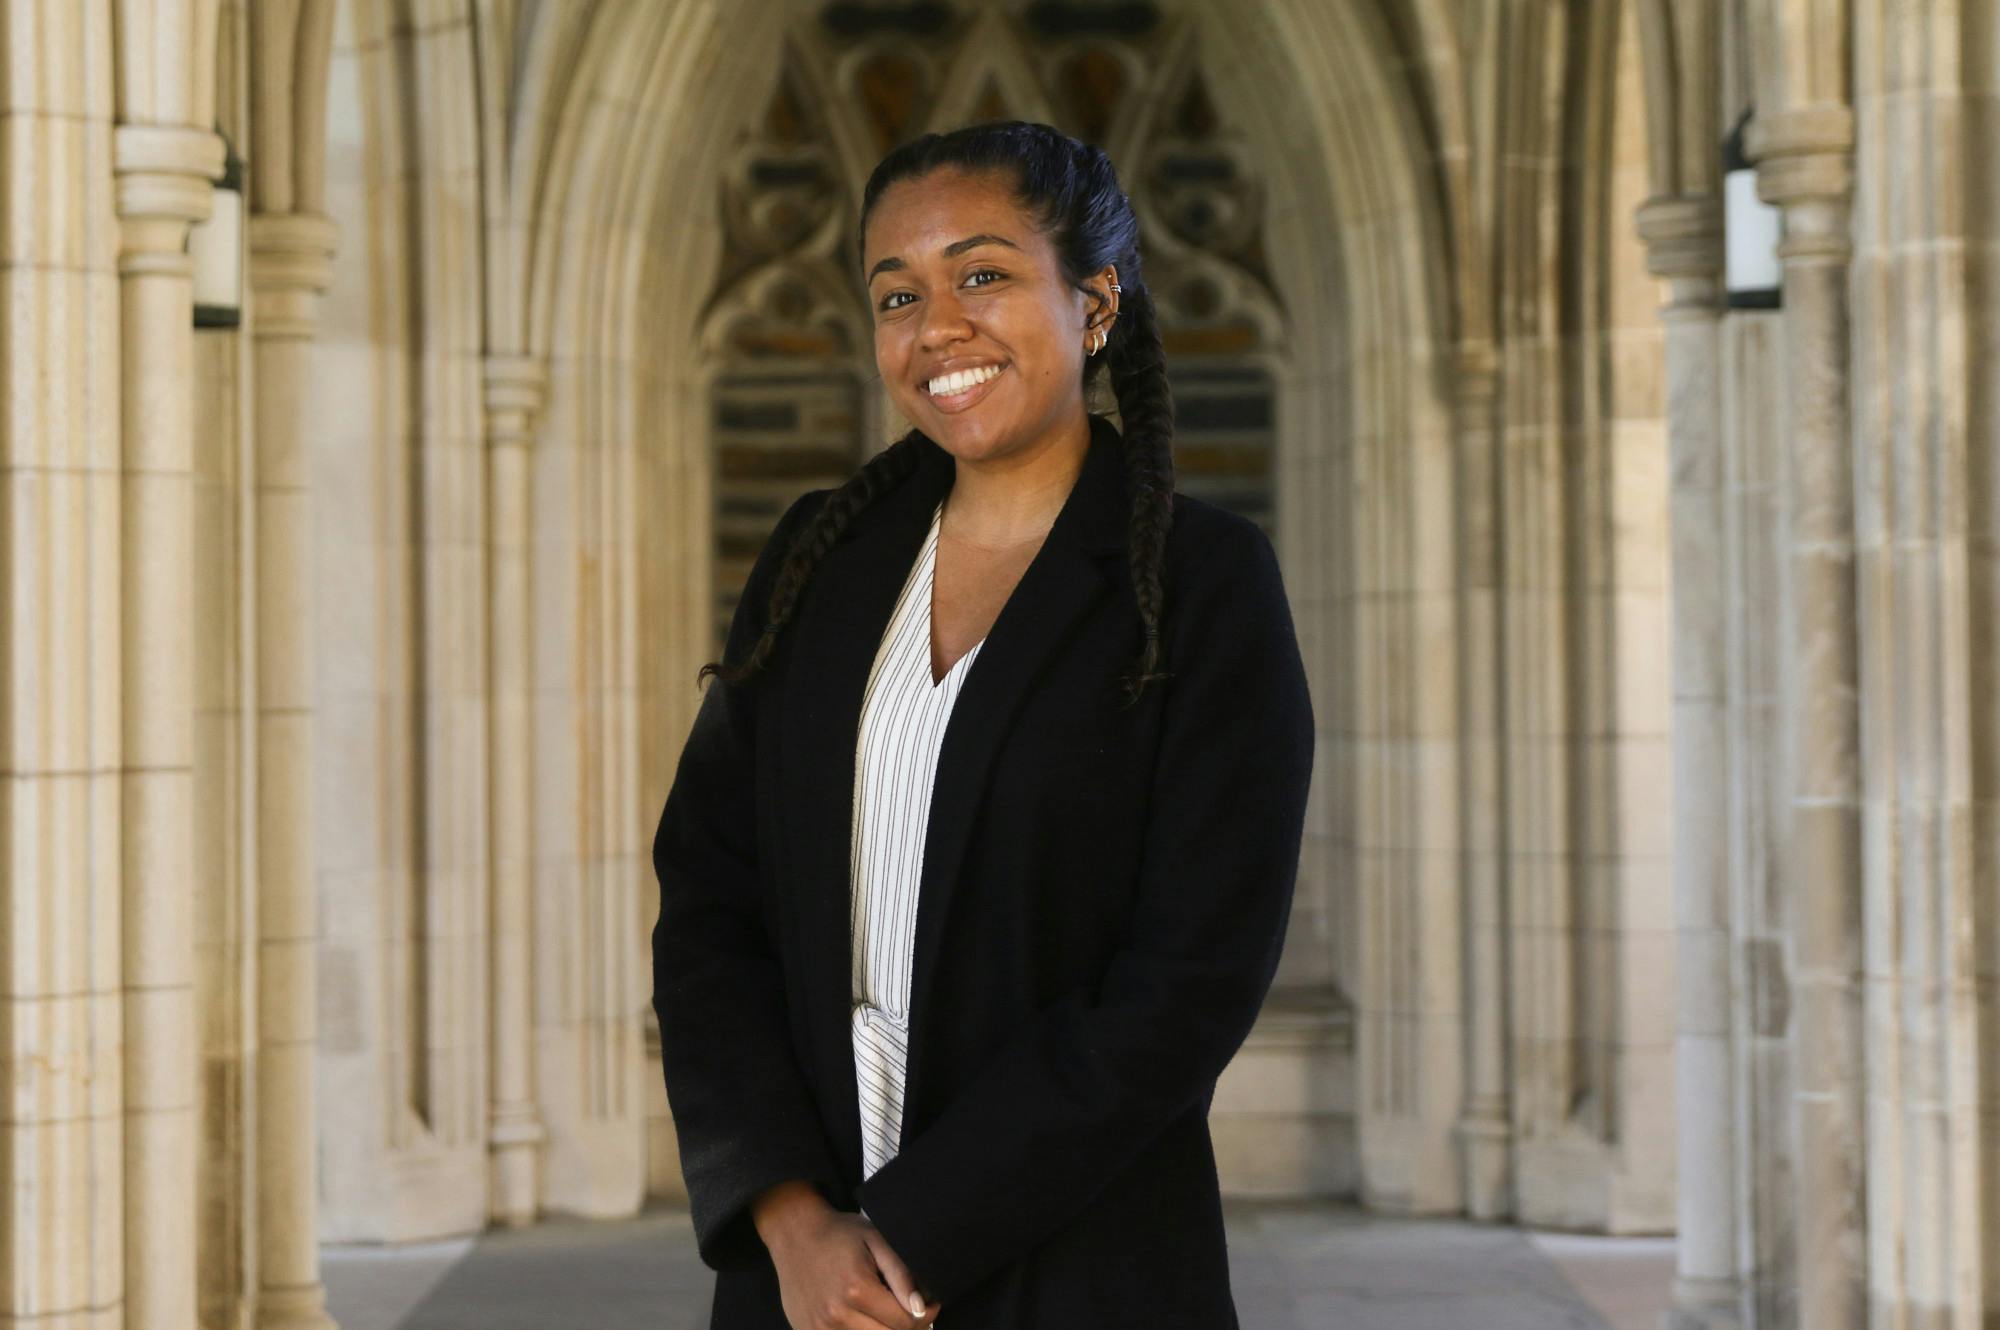 ‘Ensure everyone has access to resources they need and deserve’: Meet Undergraduate Young Trustee finalist Sydney Hunt